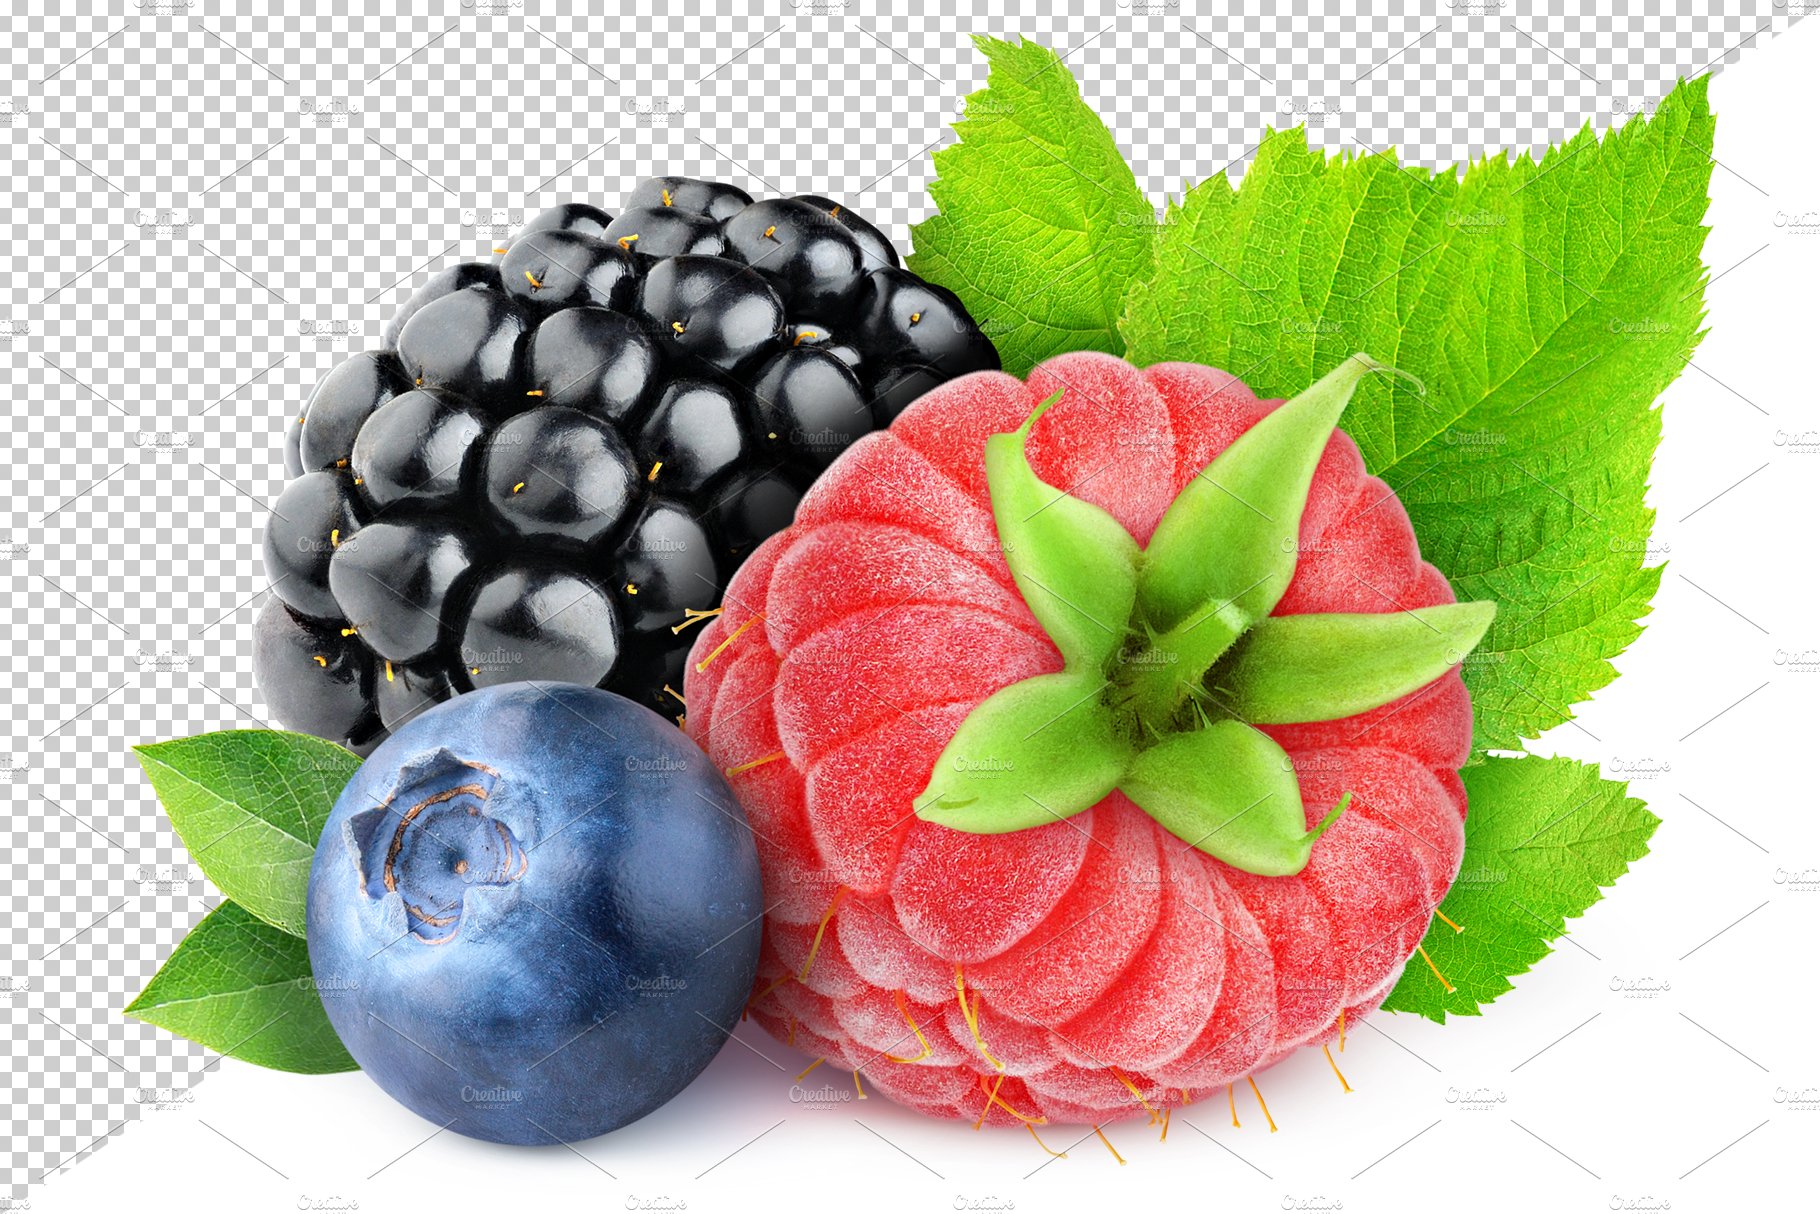 Blueberry, raspberry and blackberry preview image.